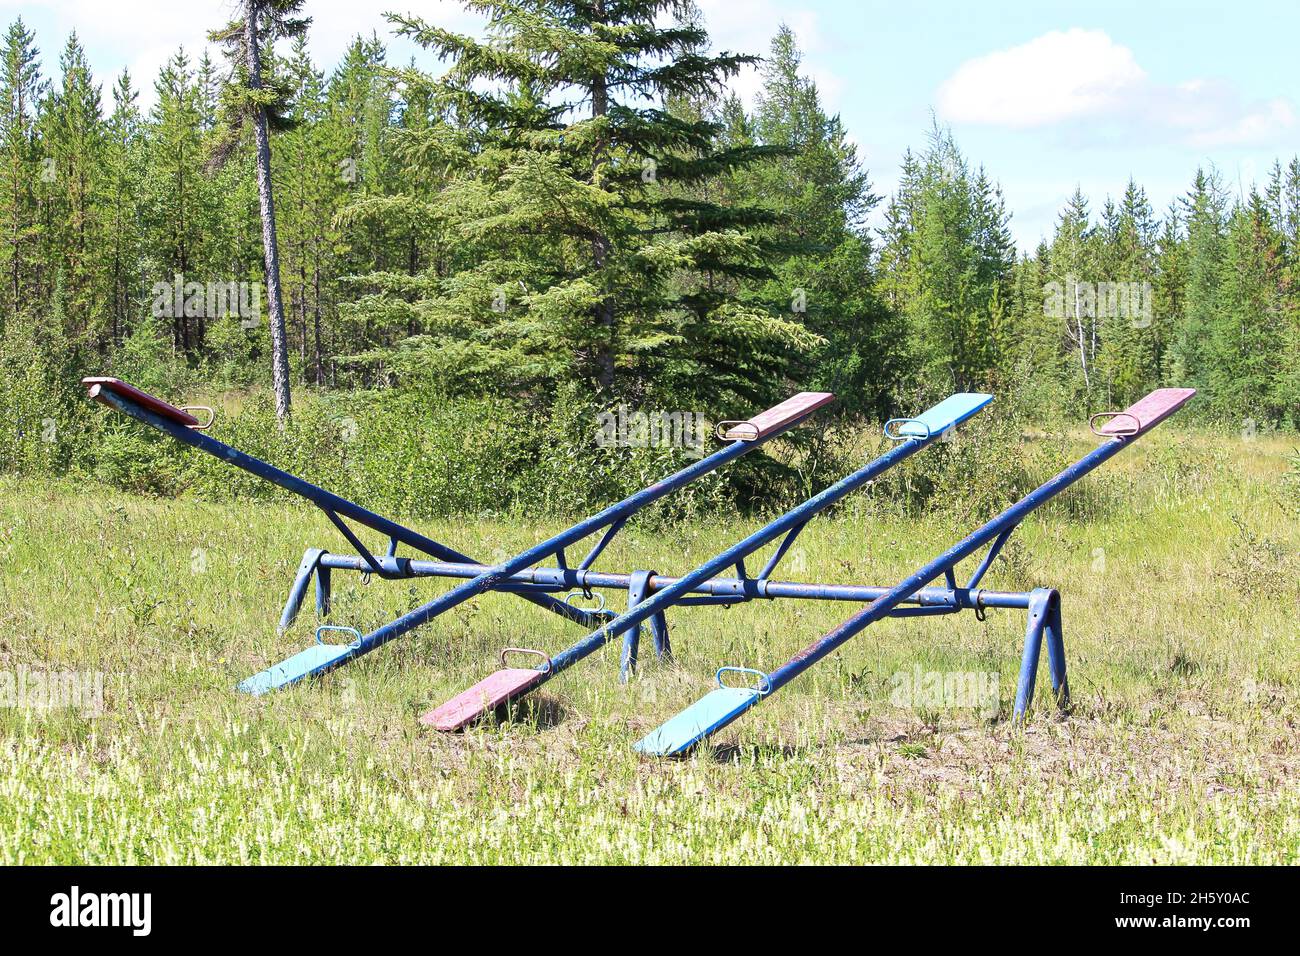 Old unmaintained teeter totters in an abandoned playground Stock Photo